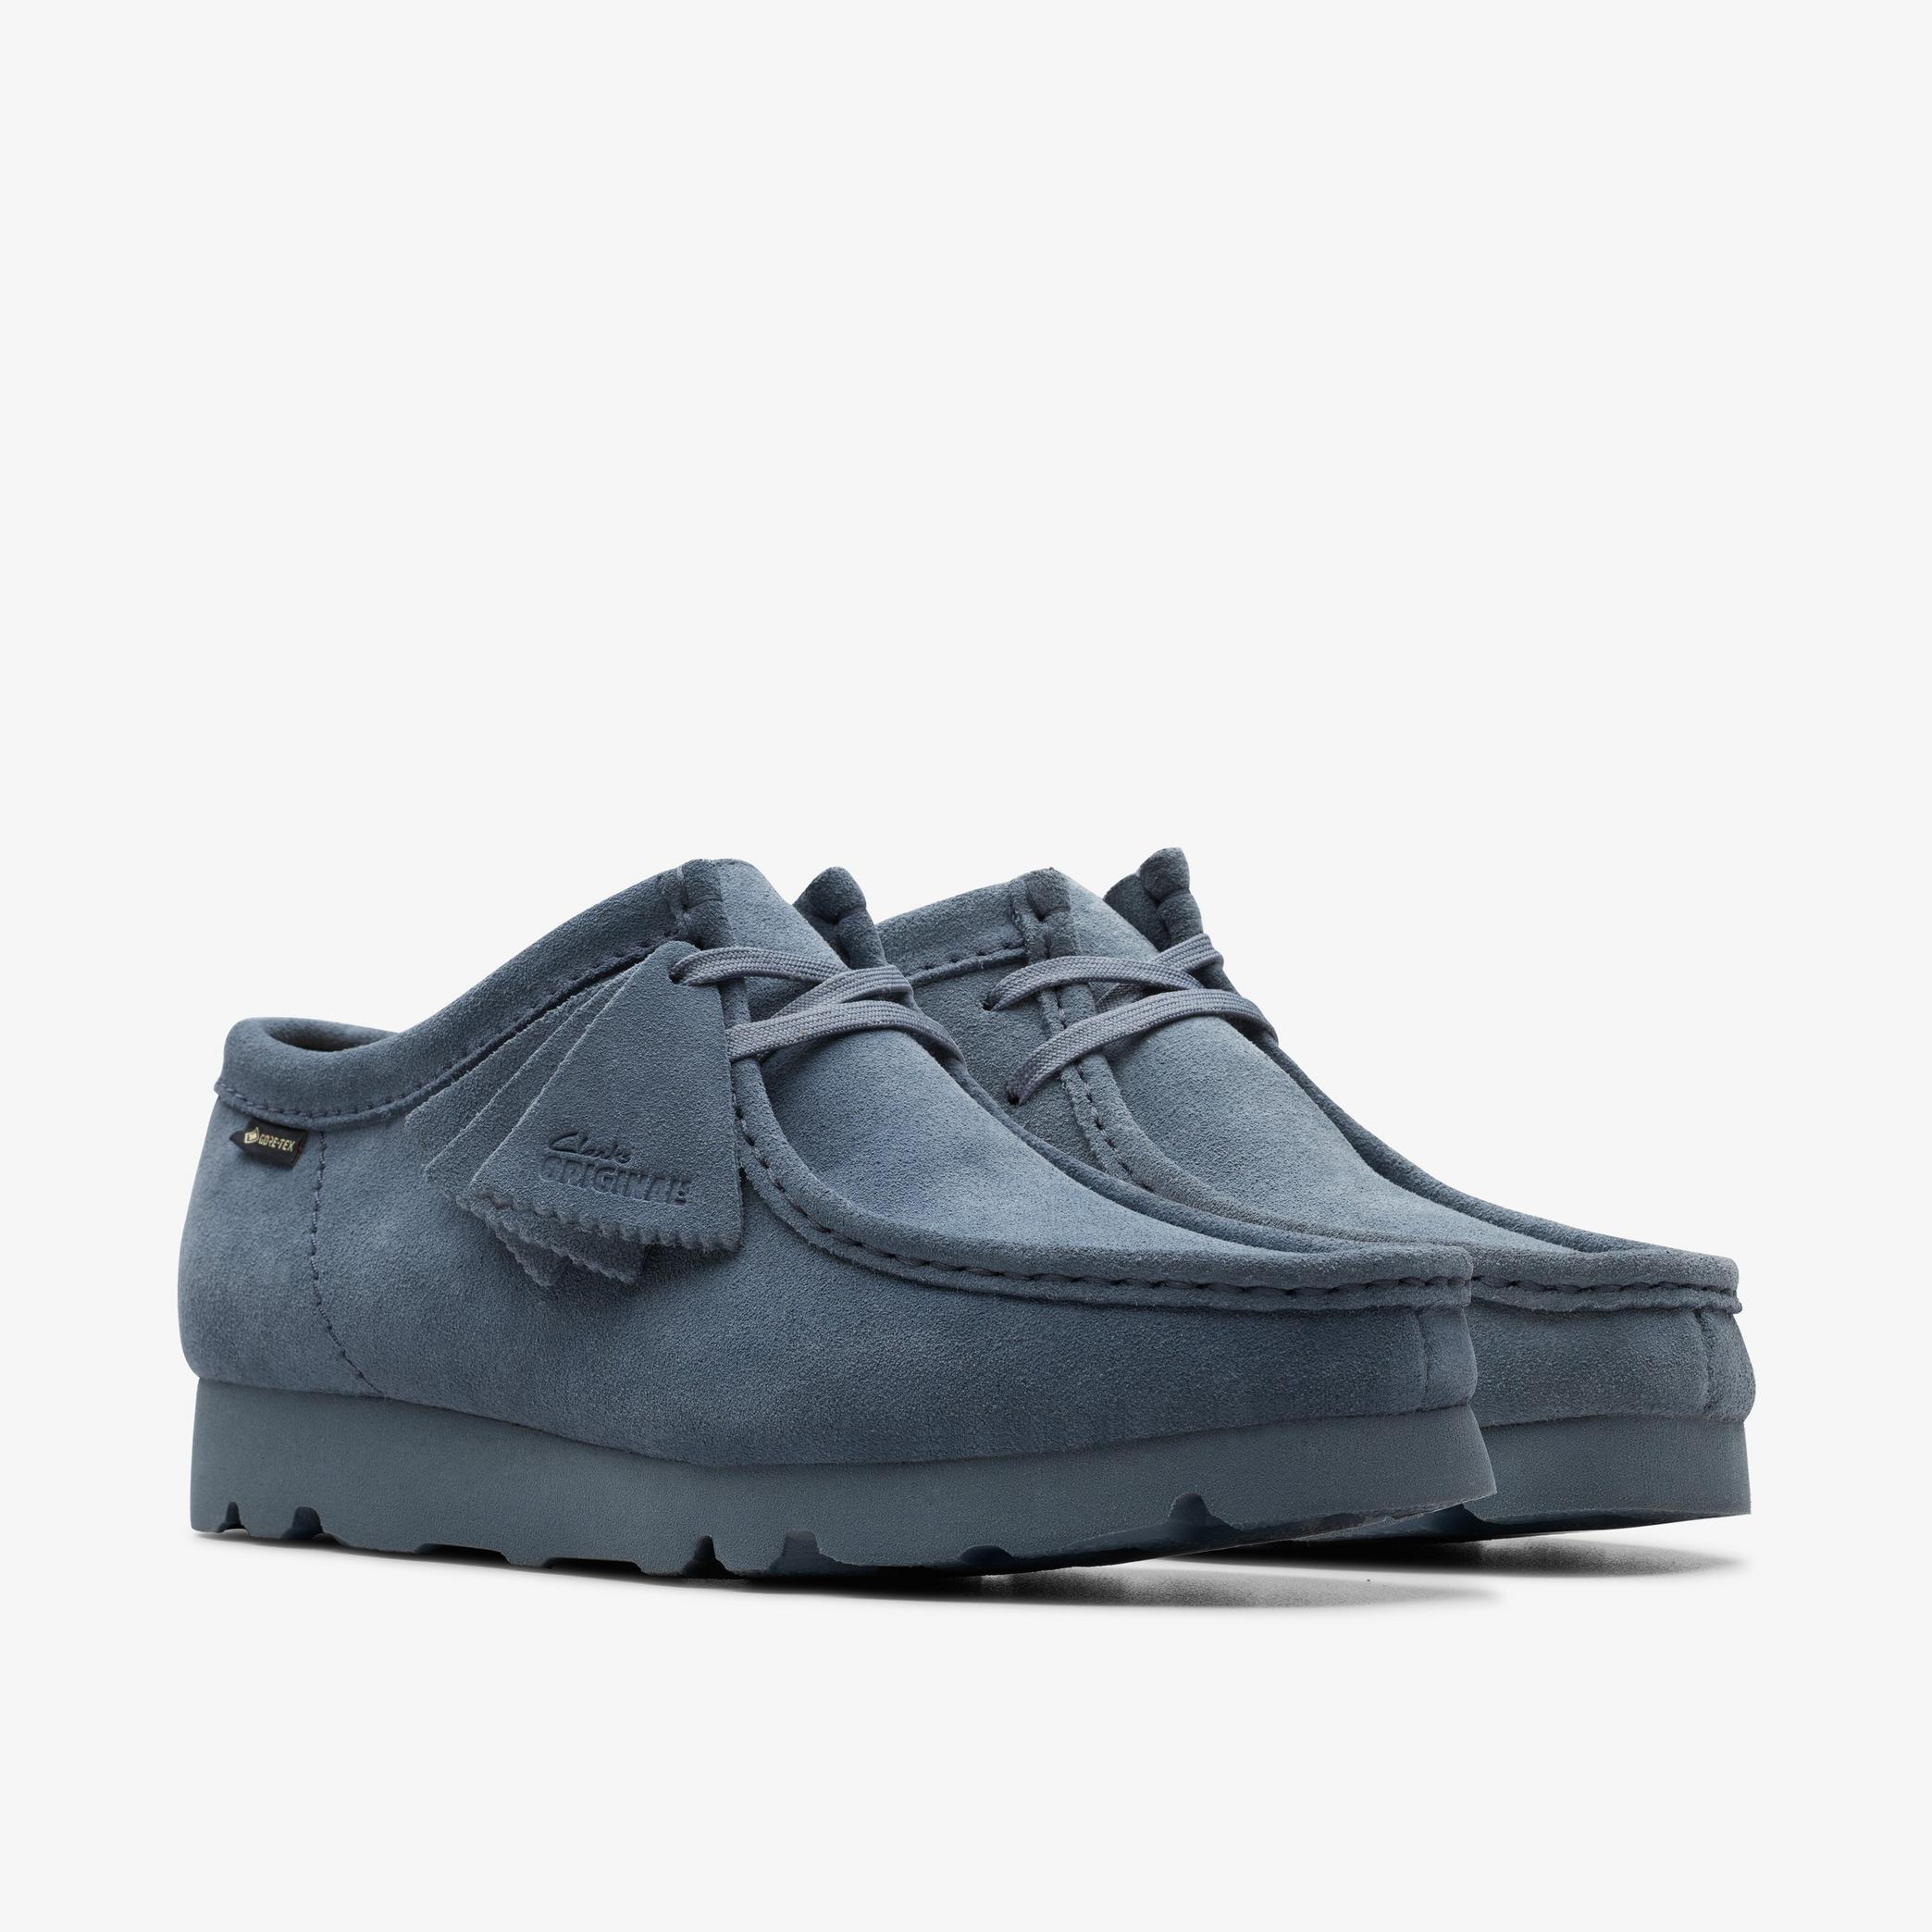 Mens Wallabee GORE-TEX Blue/Grey Suede Shoes | Clarks UK